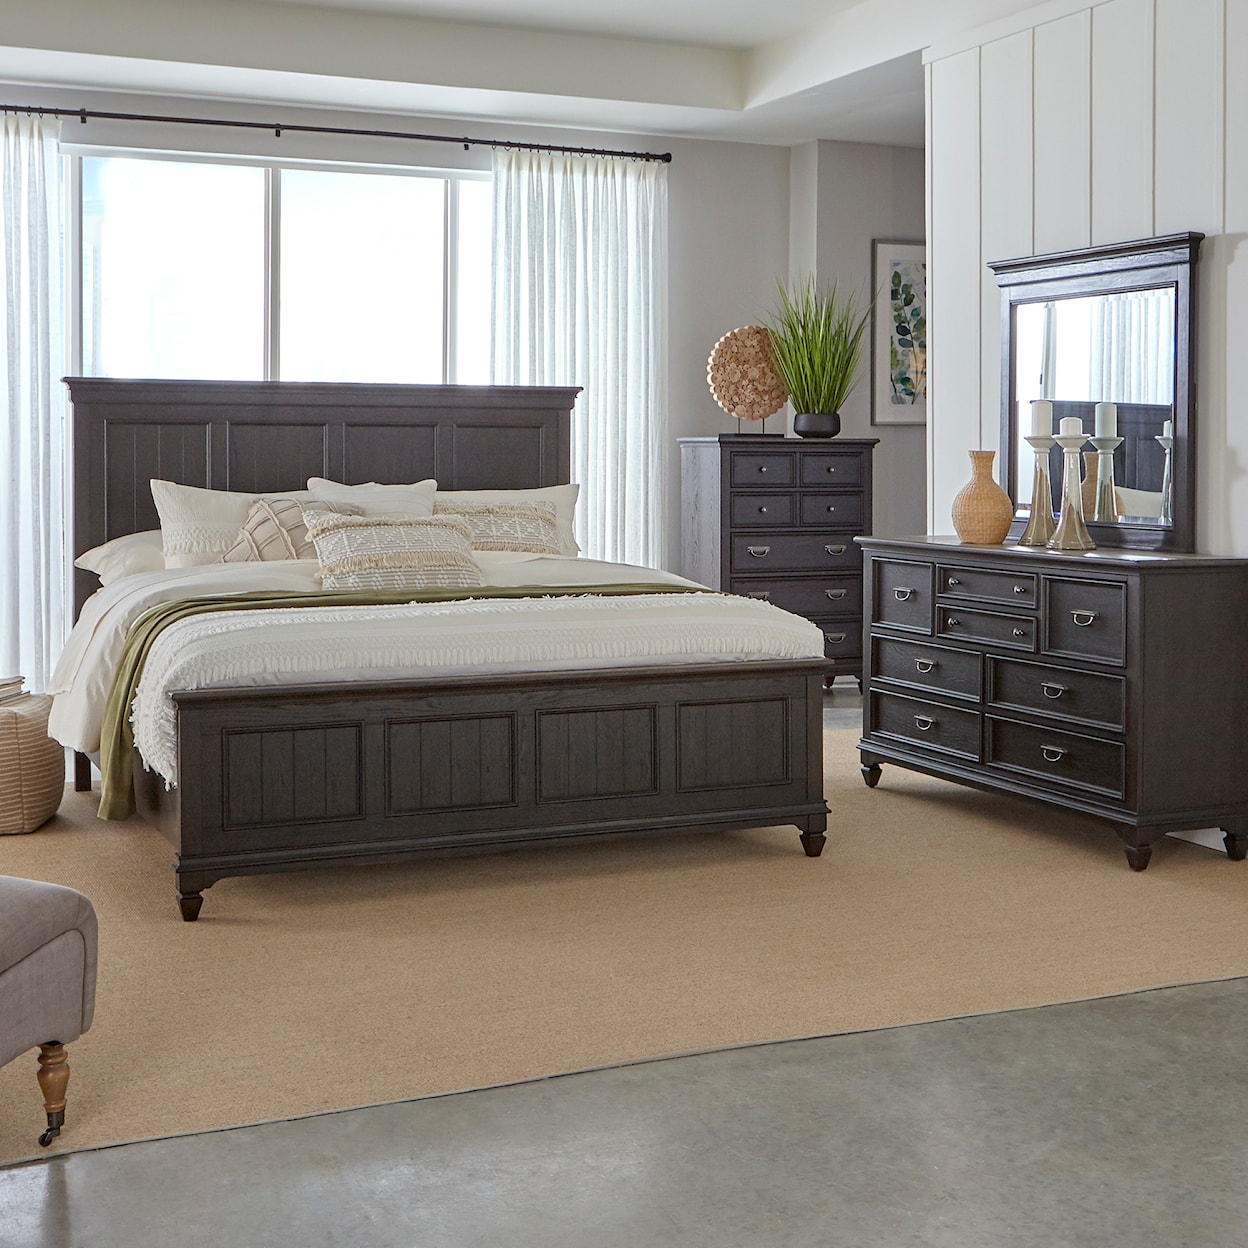 Liberty Furniture Allyson Park 417b Br Qpbdmc Queen Panel Bed Dresser And Mirror Chest Royal